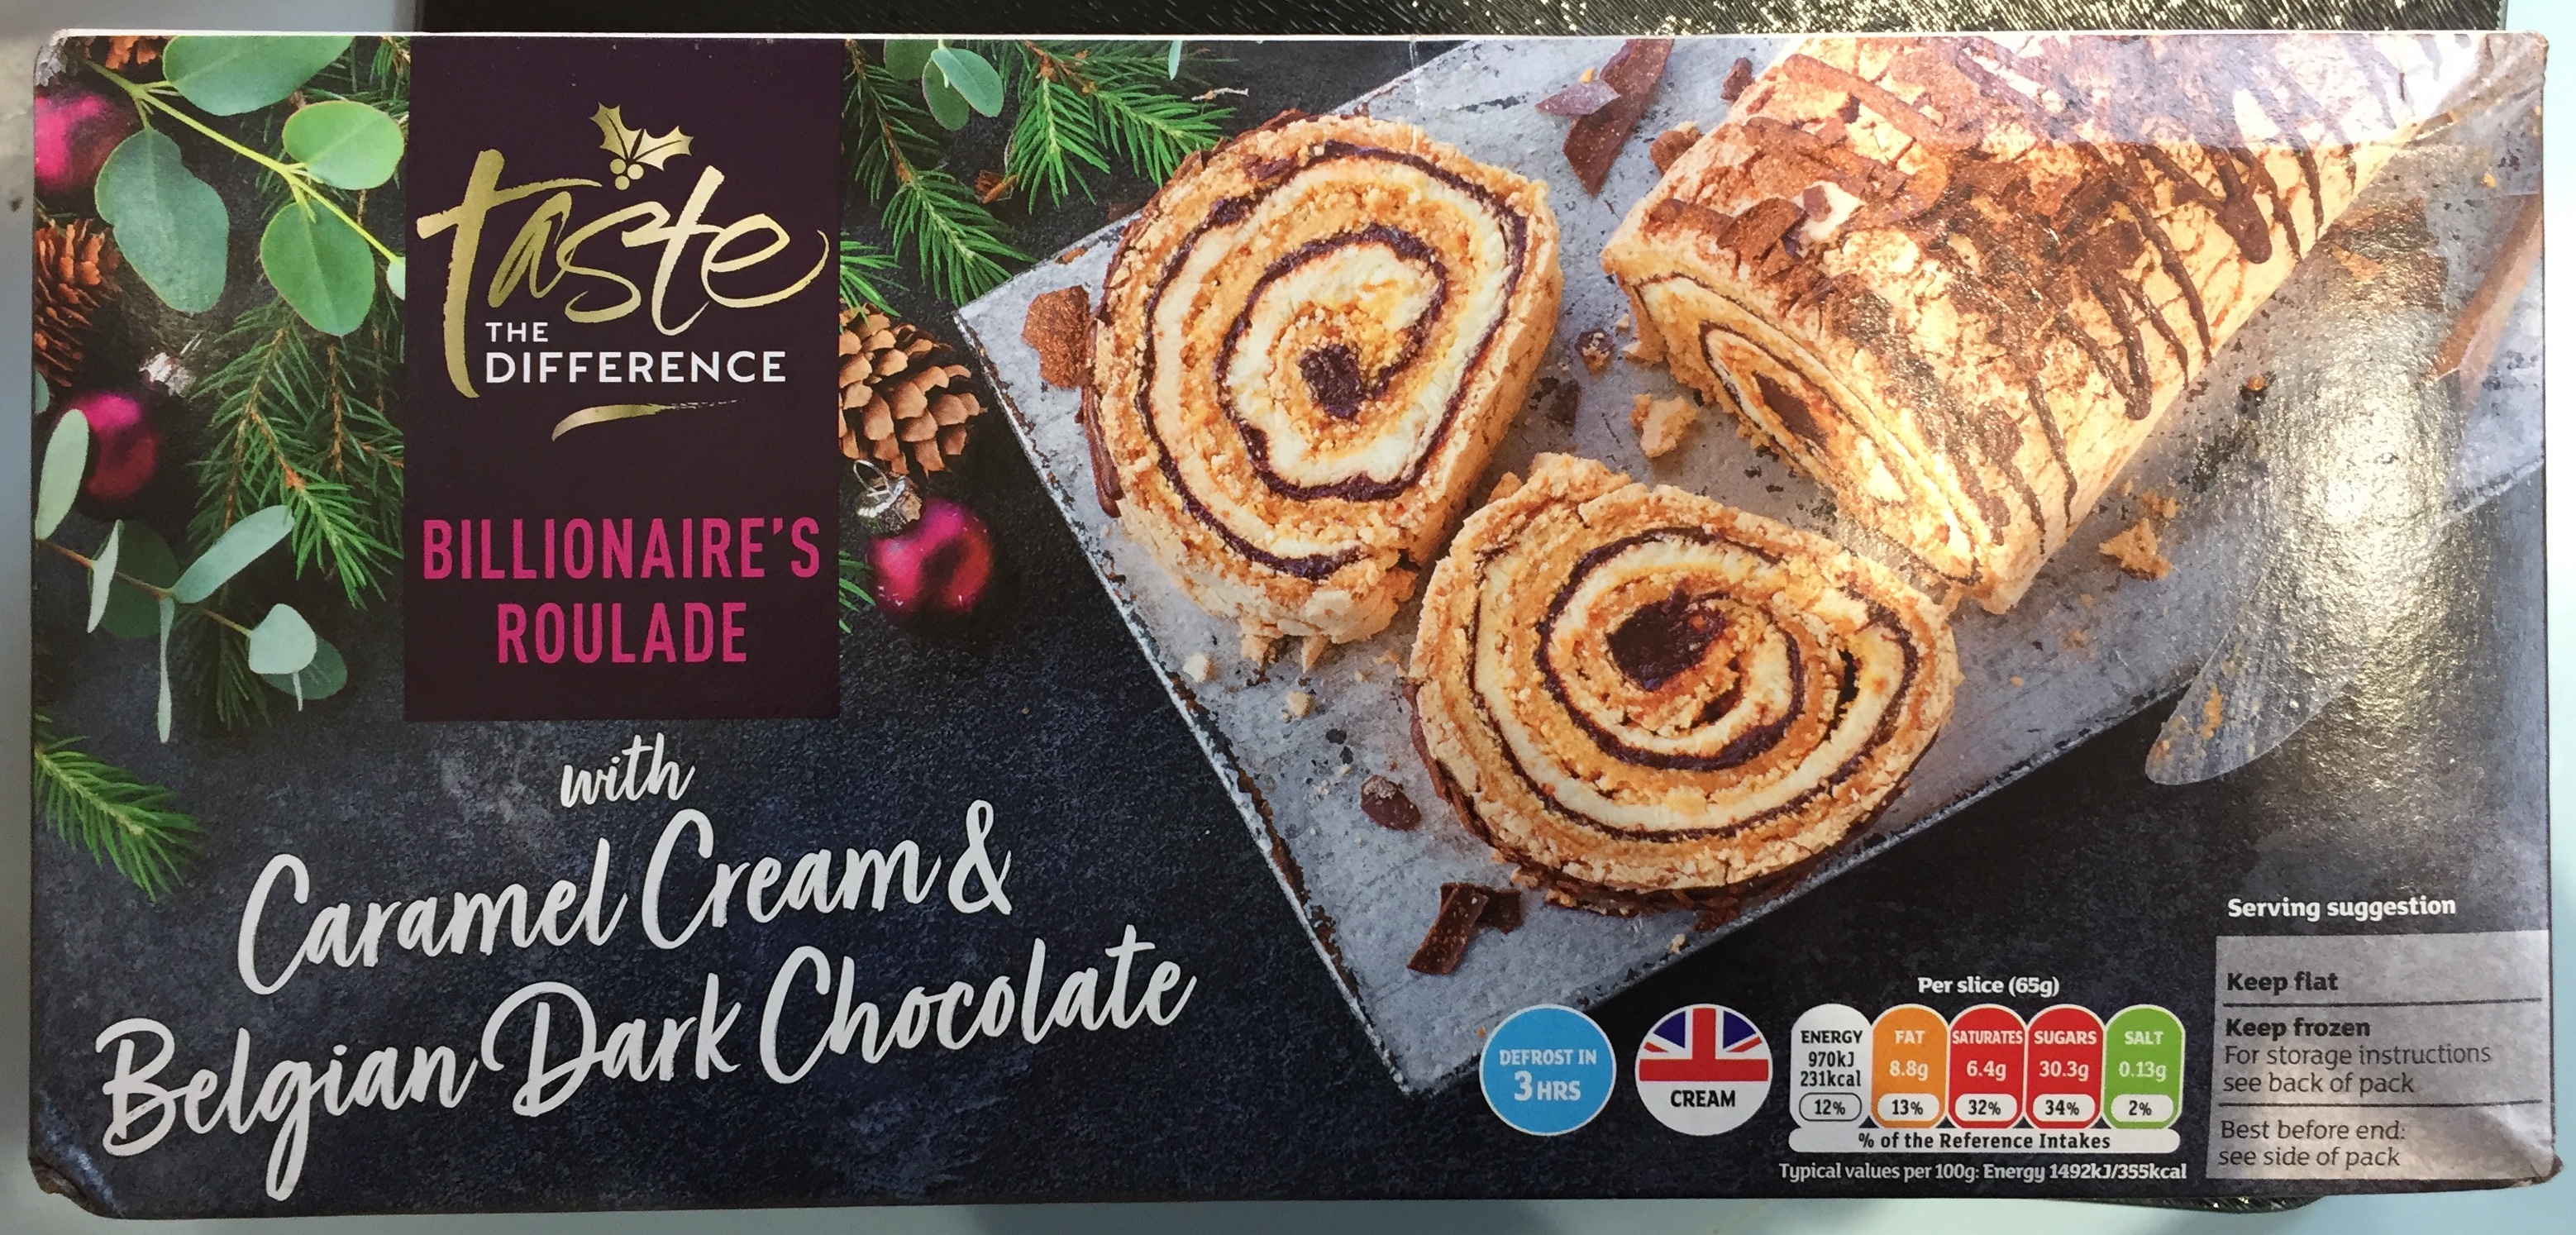 Sainsbury's Billionaire's Roulade, a meringue-based dessert that looks like a Swiss roll, with spiralling layers of caramel cream and Belgian dark chocolate.